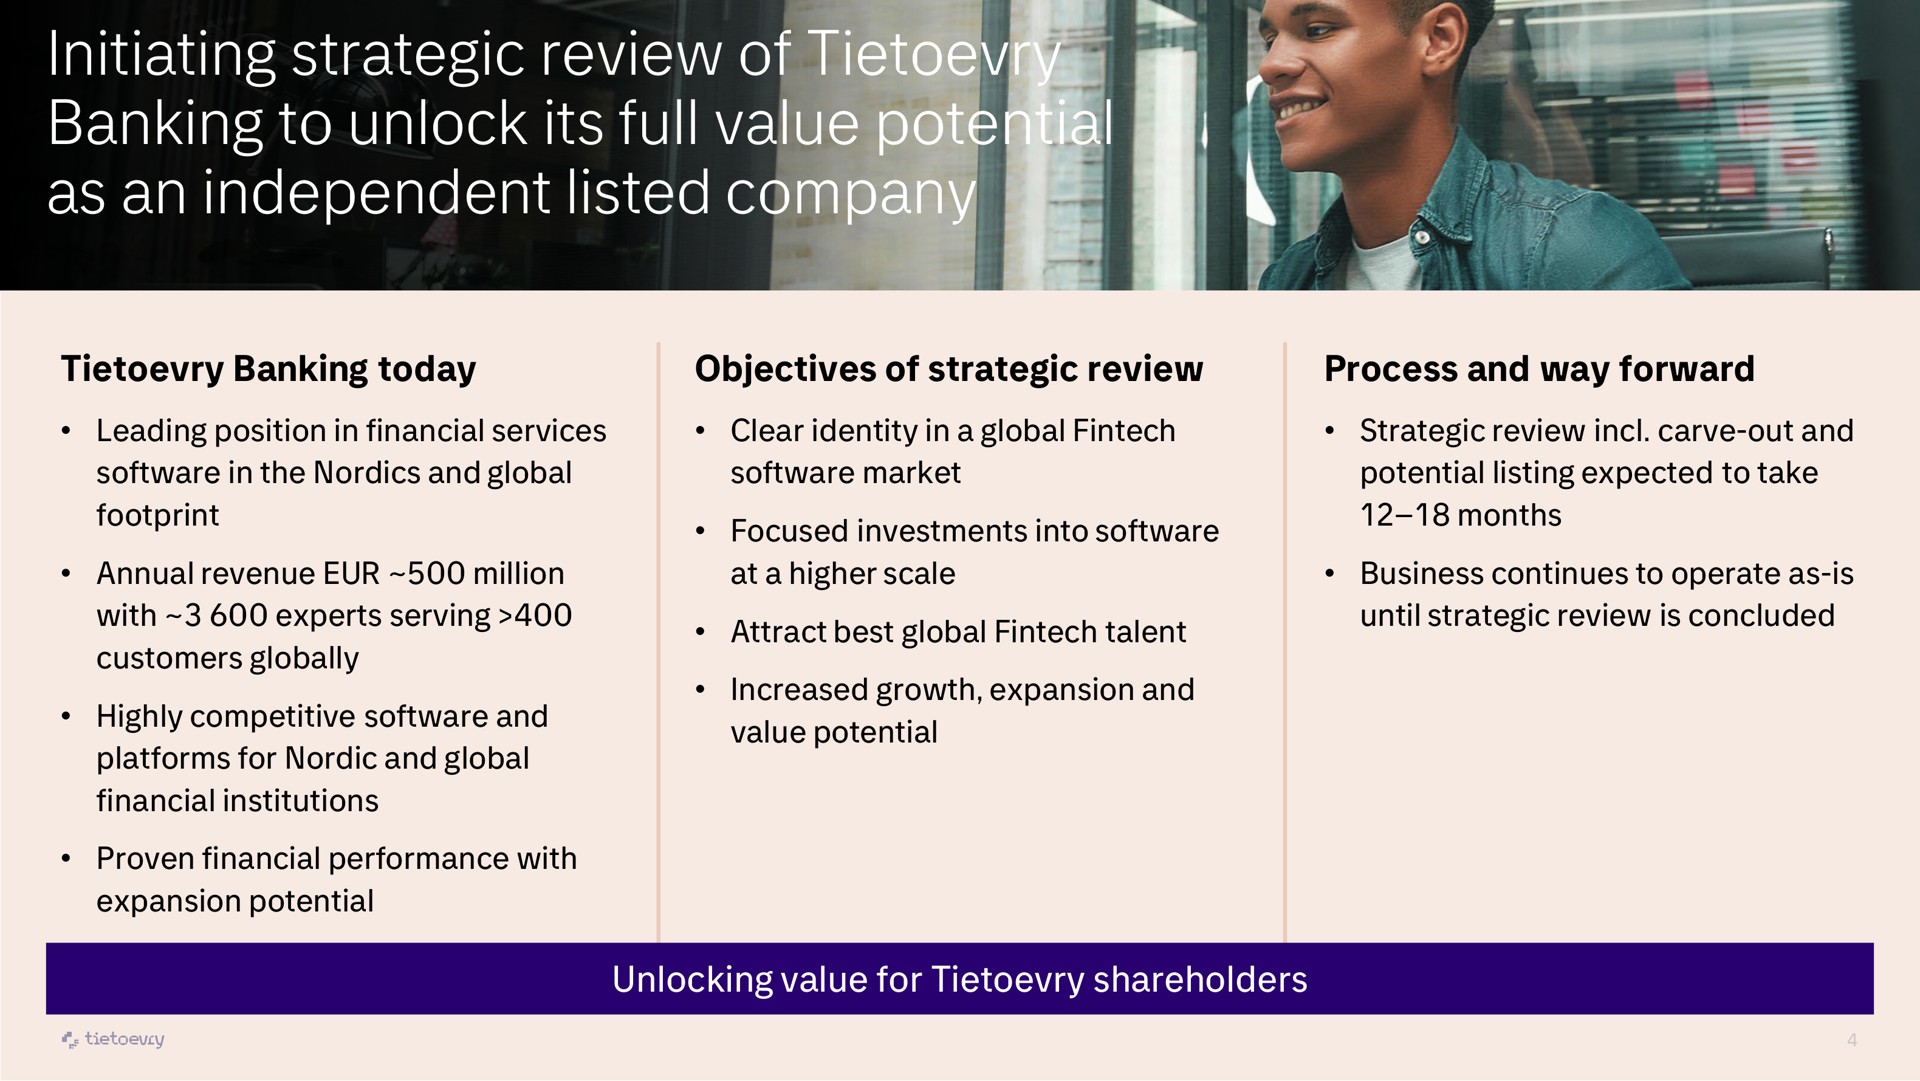 initiating strategic review of banking to unlock its full value potential as an independent listed company con | Tietoevry